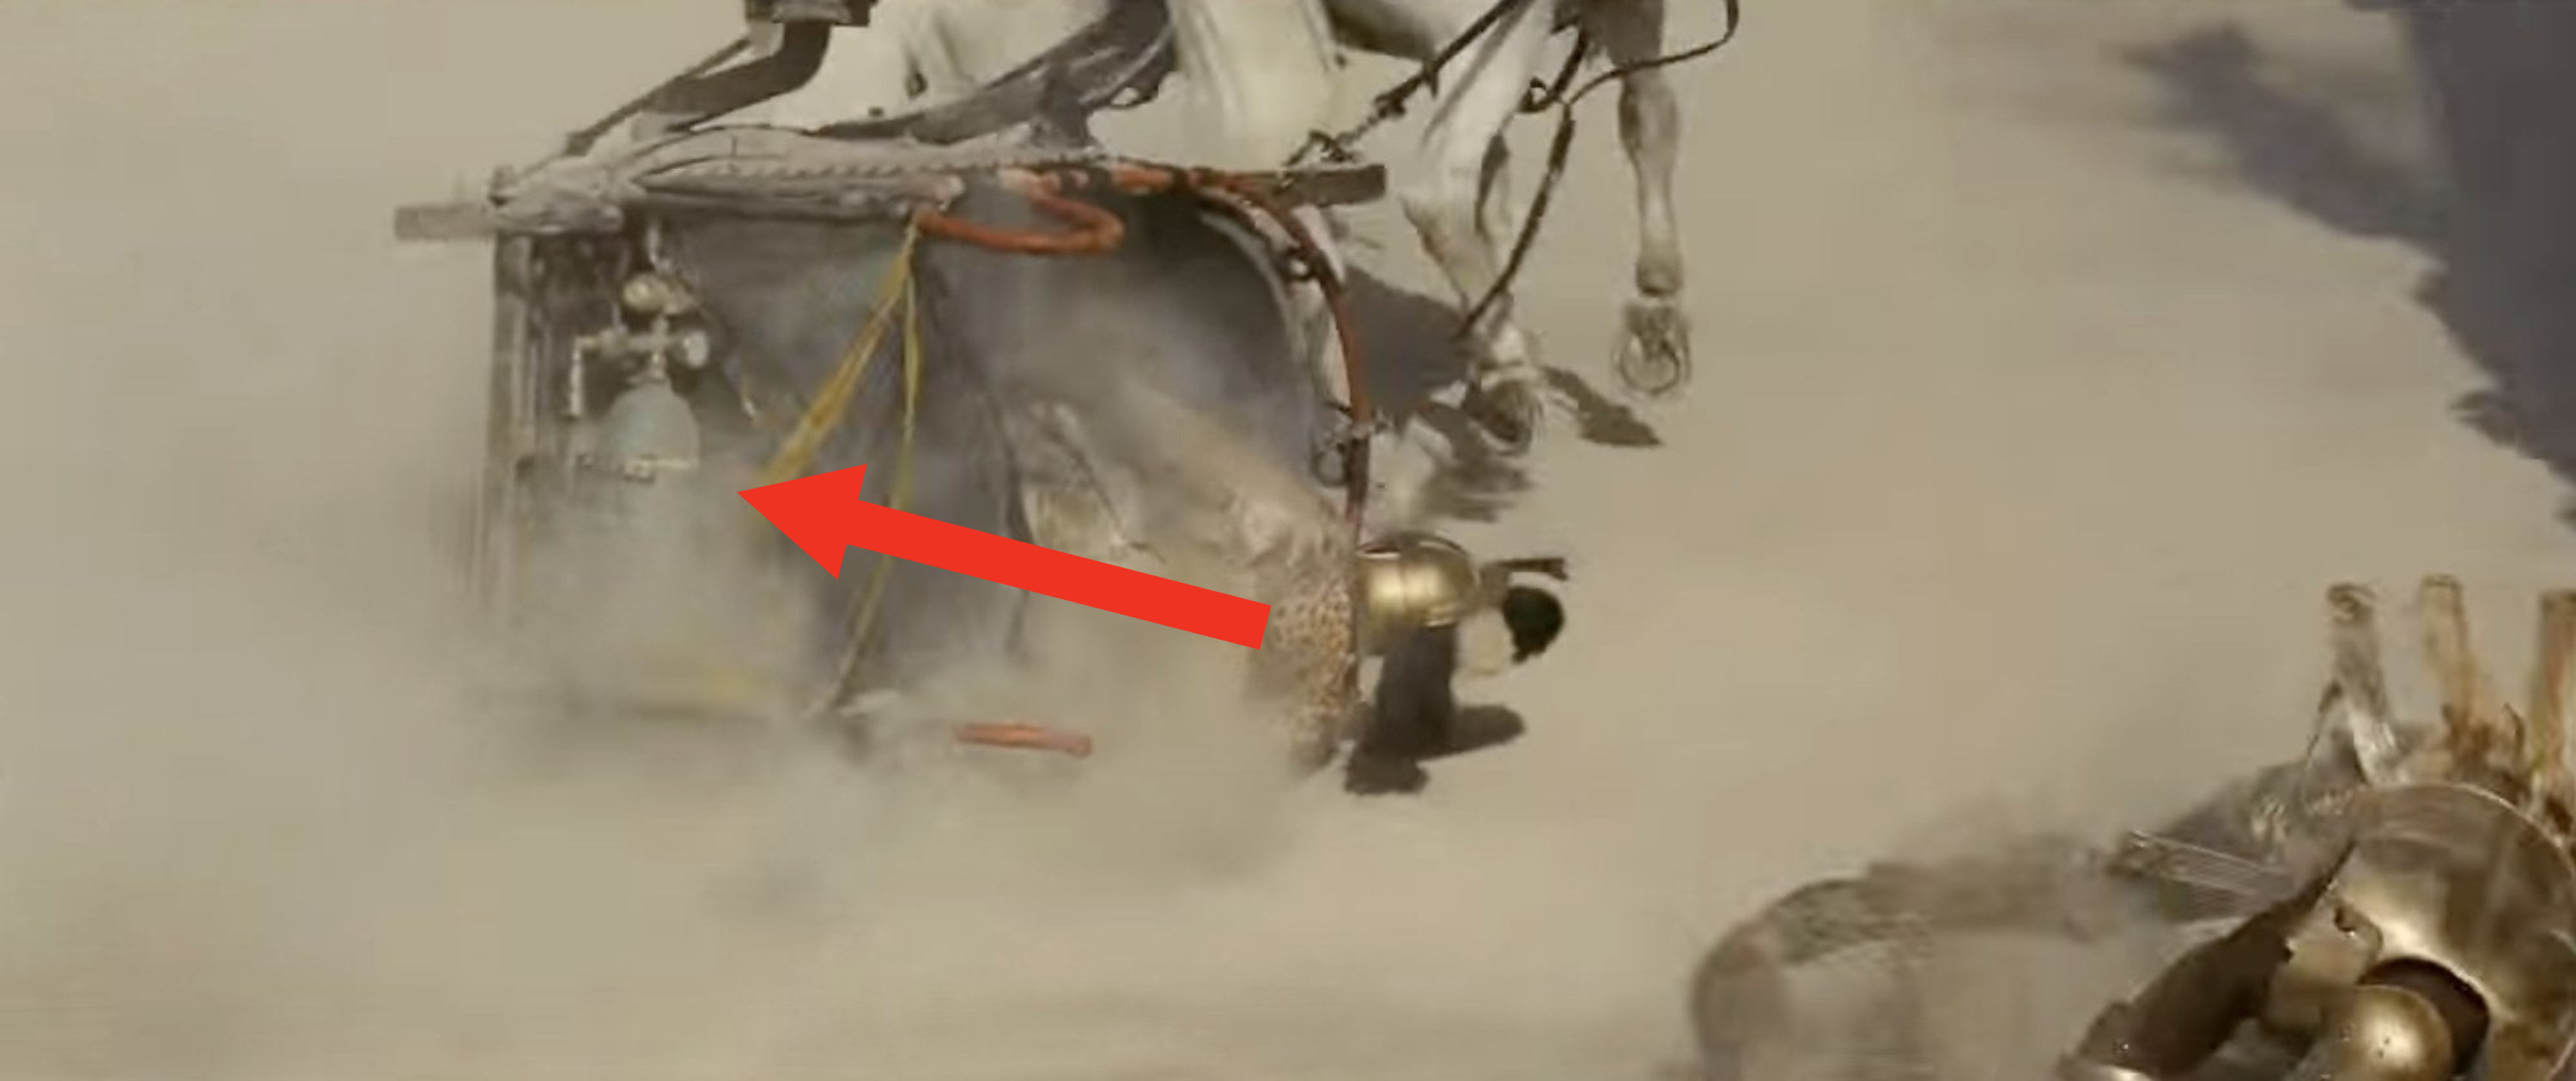 A gas canister underneath an overturned chariot in Gladiator